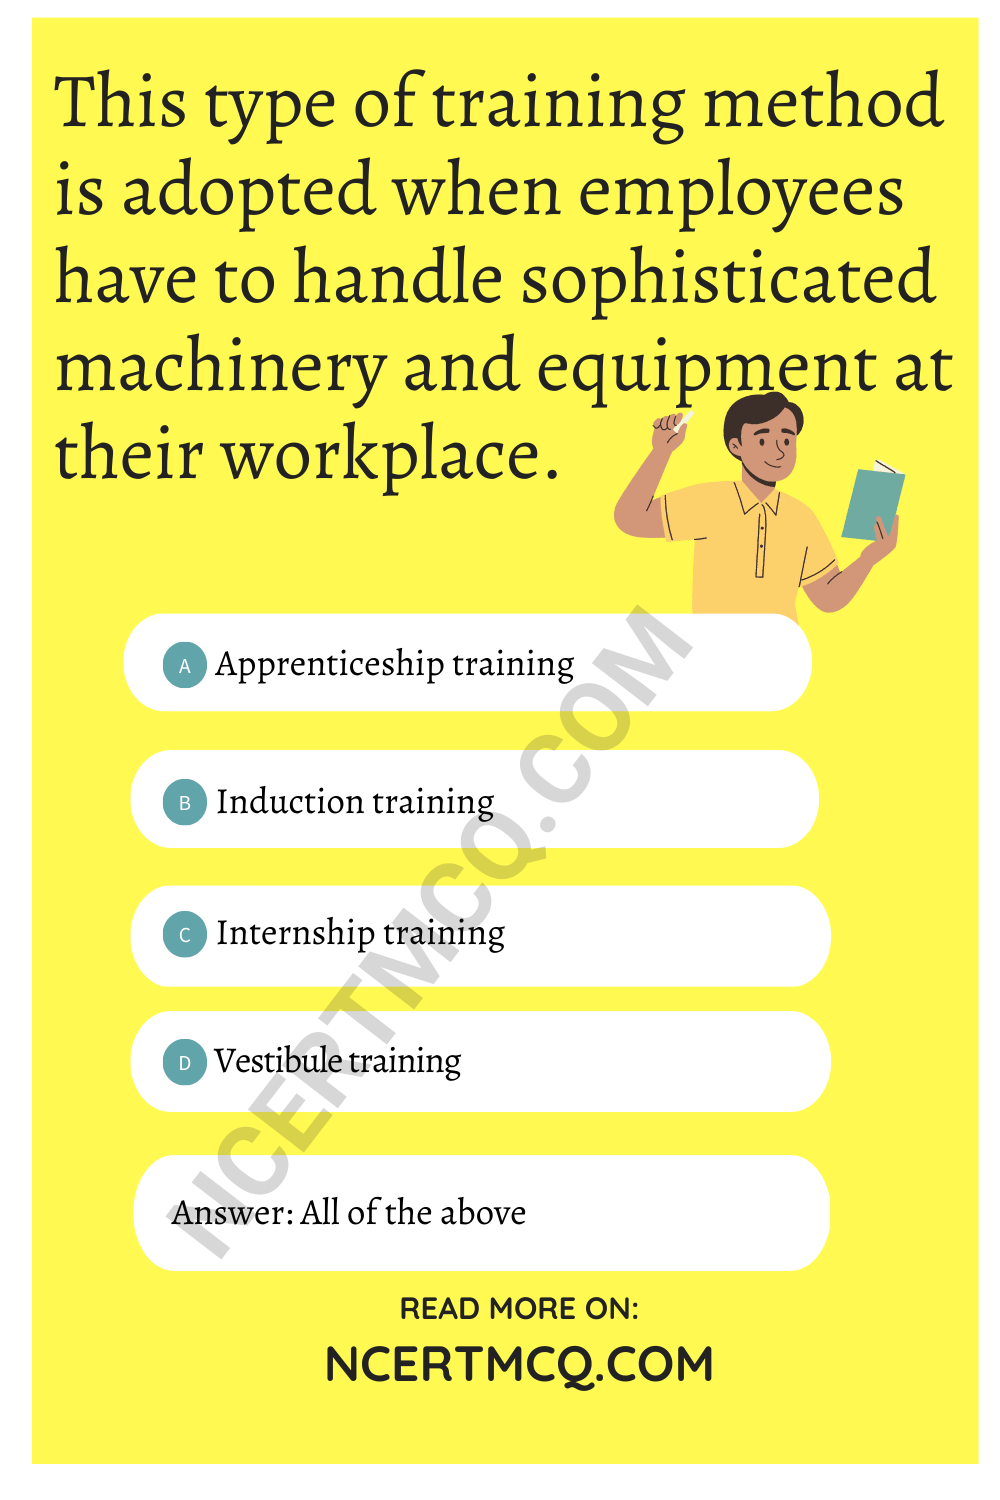 This type of training method is adopted when employees have to handle sophisticated machinery and equipment at their workplace.